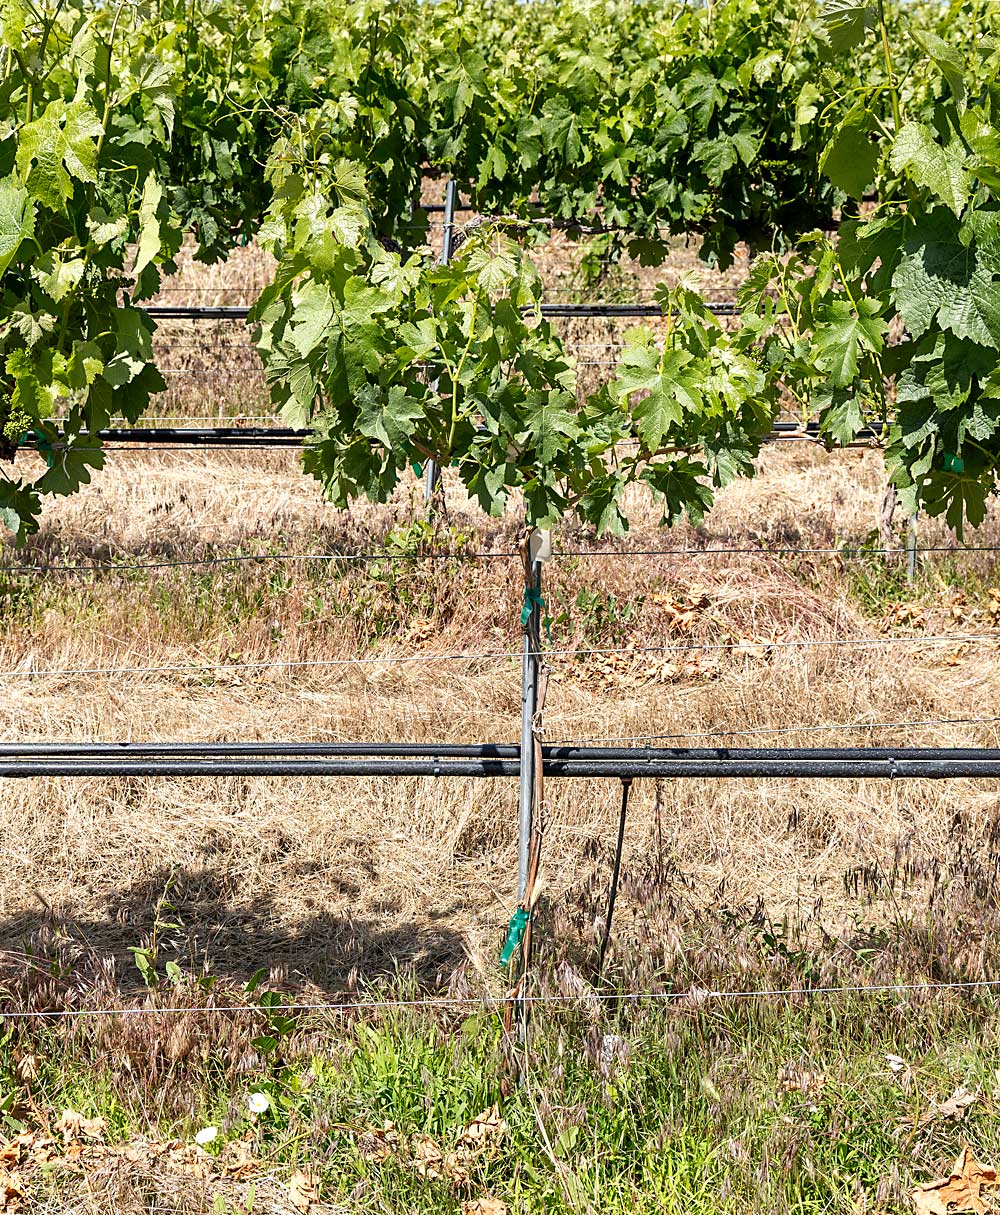 Managers of Dineen Vineyards near Zillah, Washington, used subsurface irrigation on young vines replanted because of red blotch in this Merlot block. (Kate Prengaman/Good Fruit Grower)